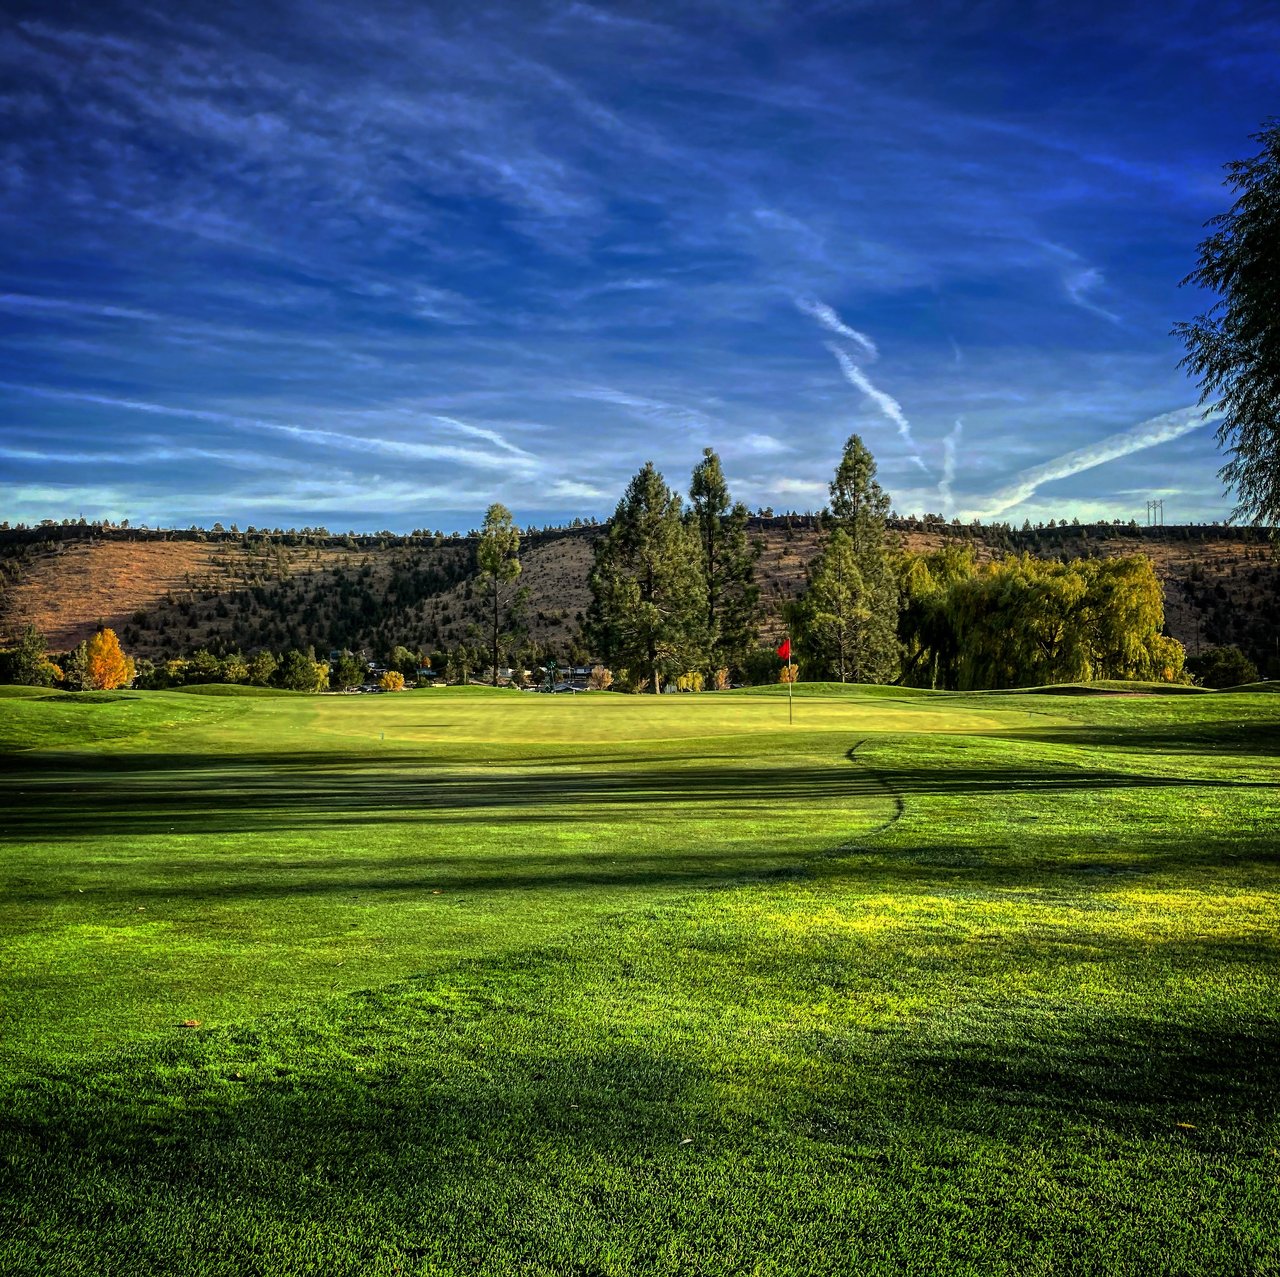 The Meadow Lakes Golf Club landscape